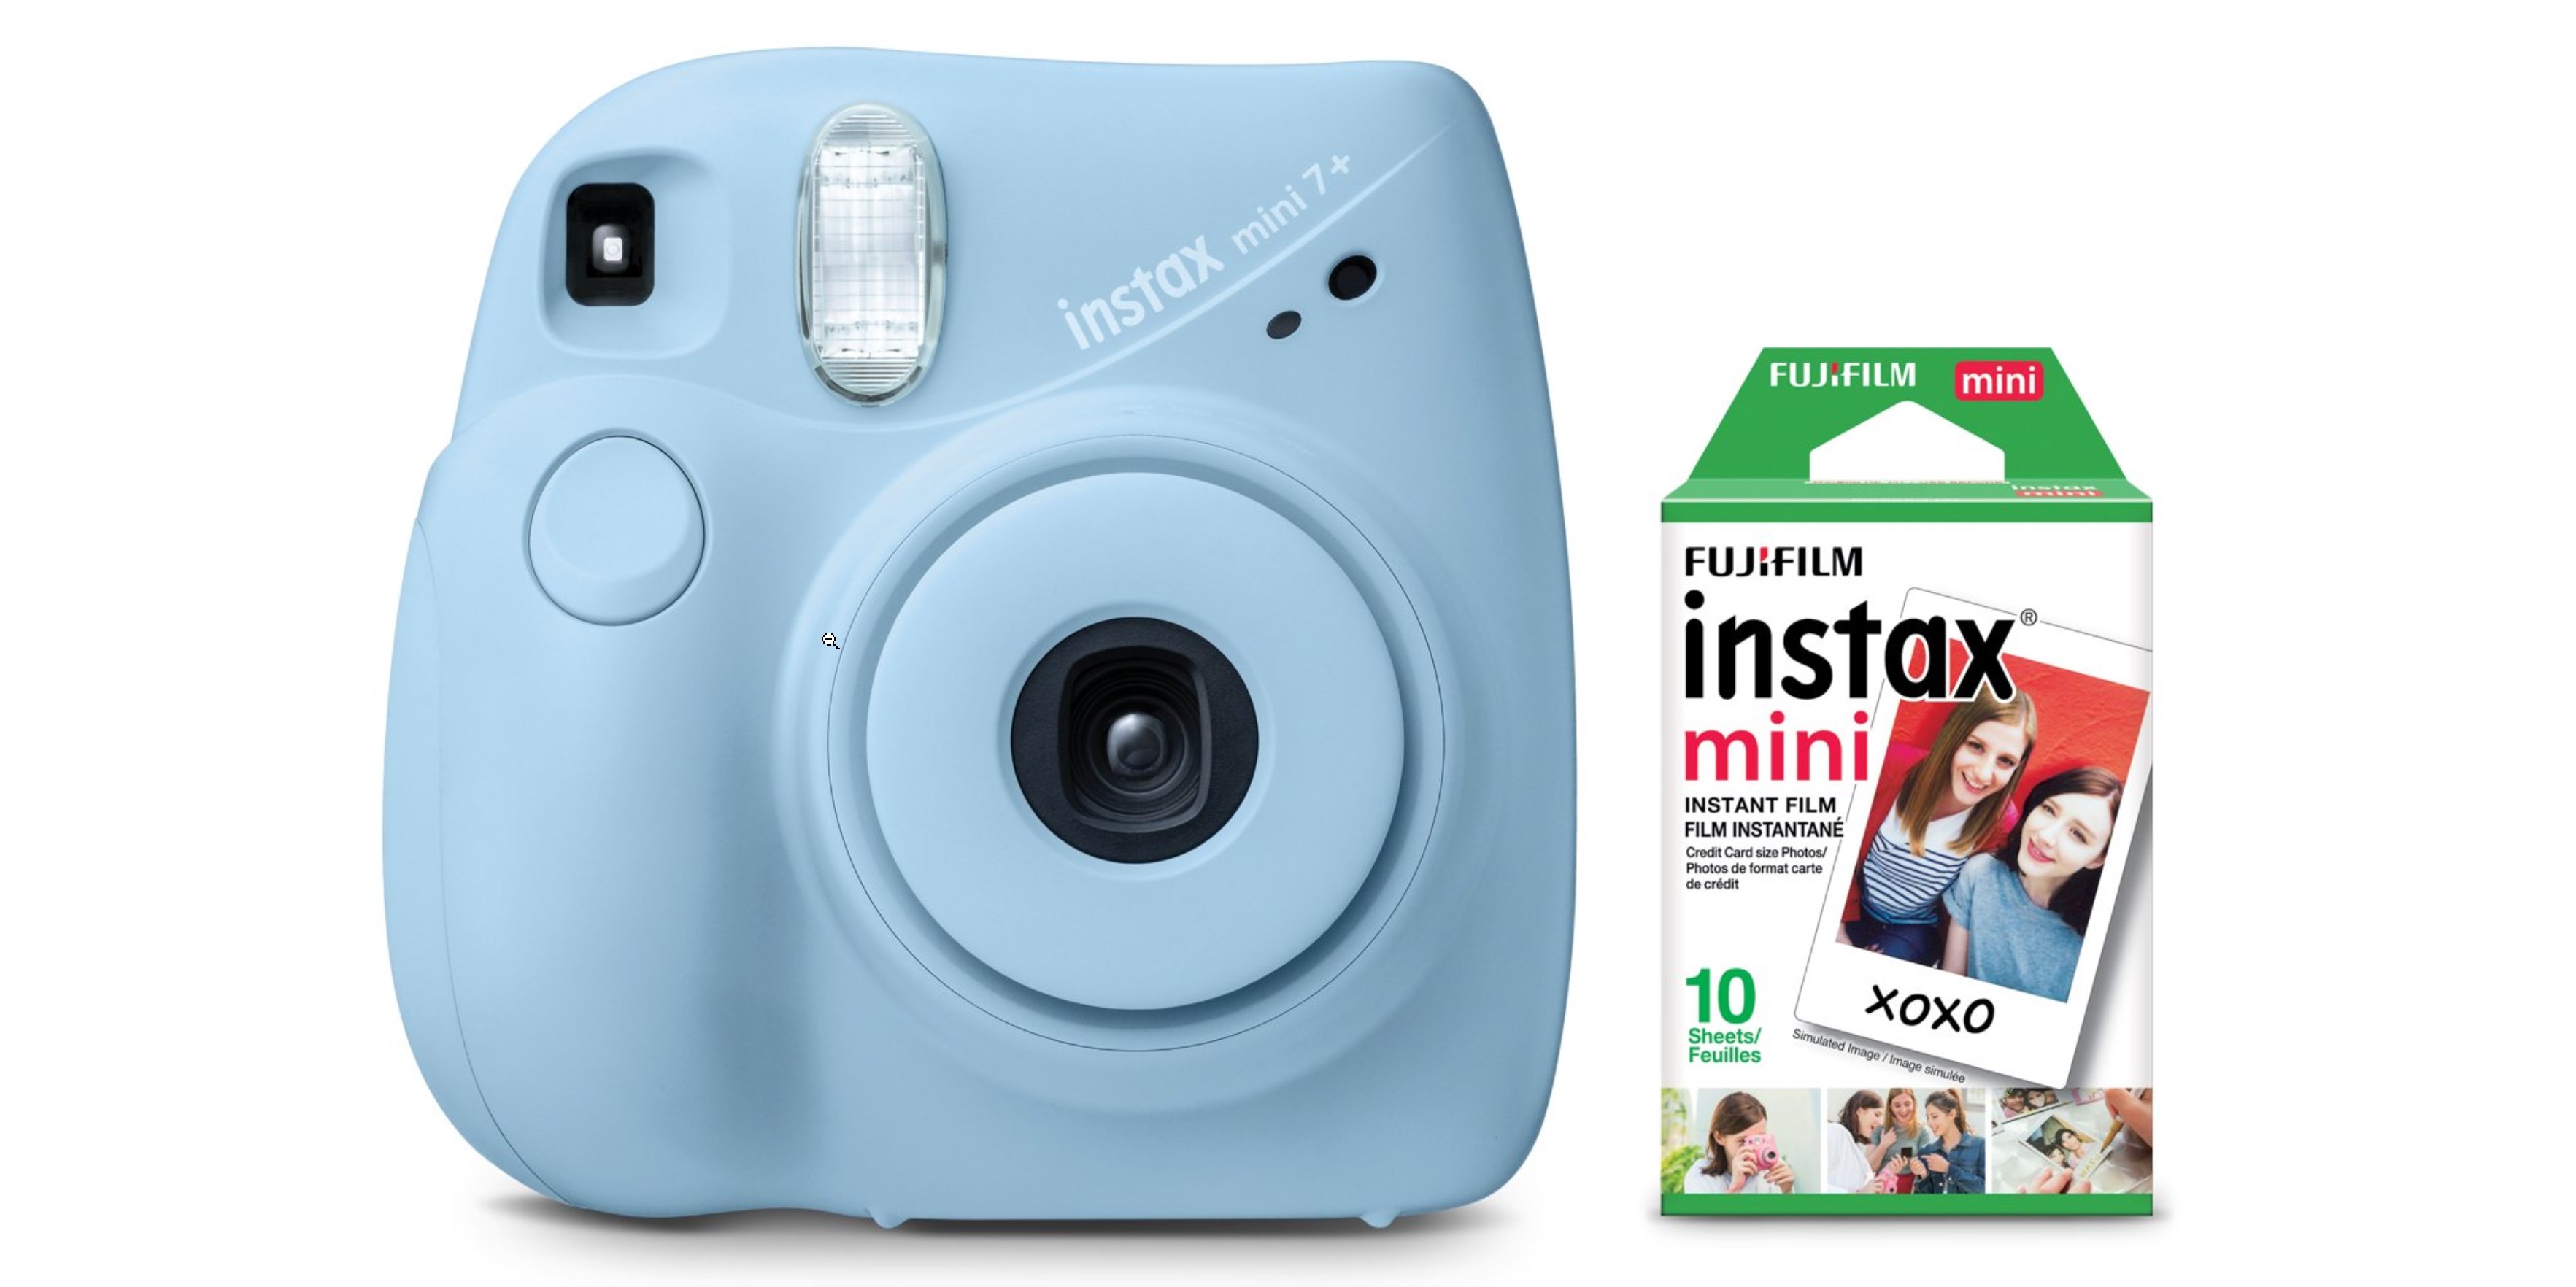 kloon Voetganger Vlek This Polaroid-style Fujifilm instant camera is $49 for Cyber Monday |  Digital Trends